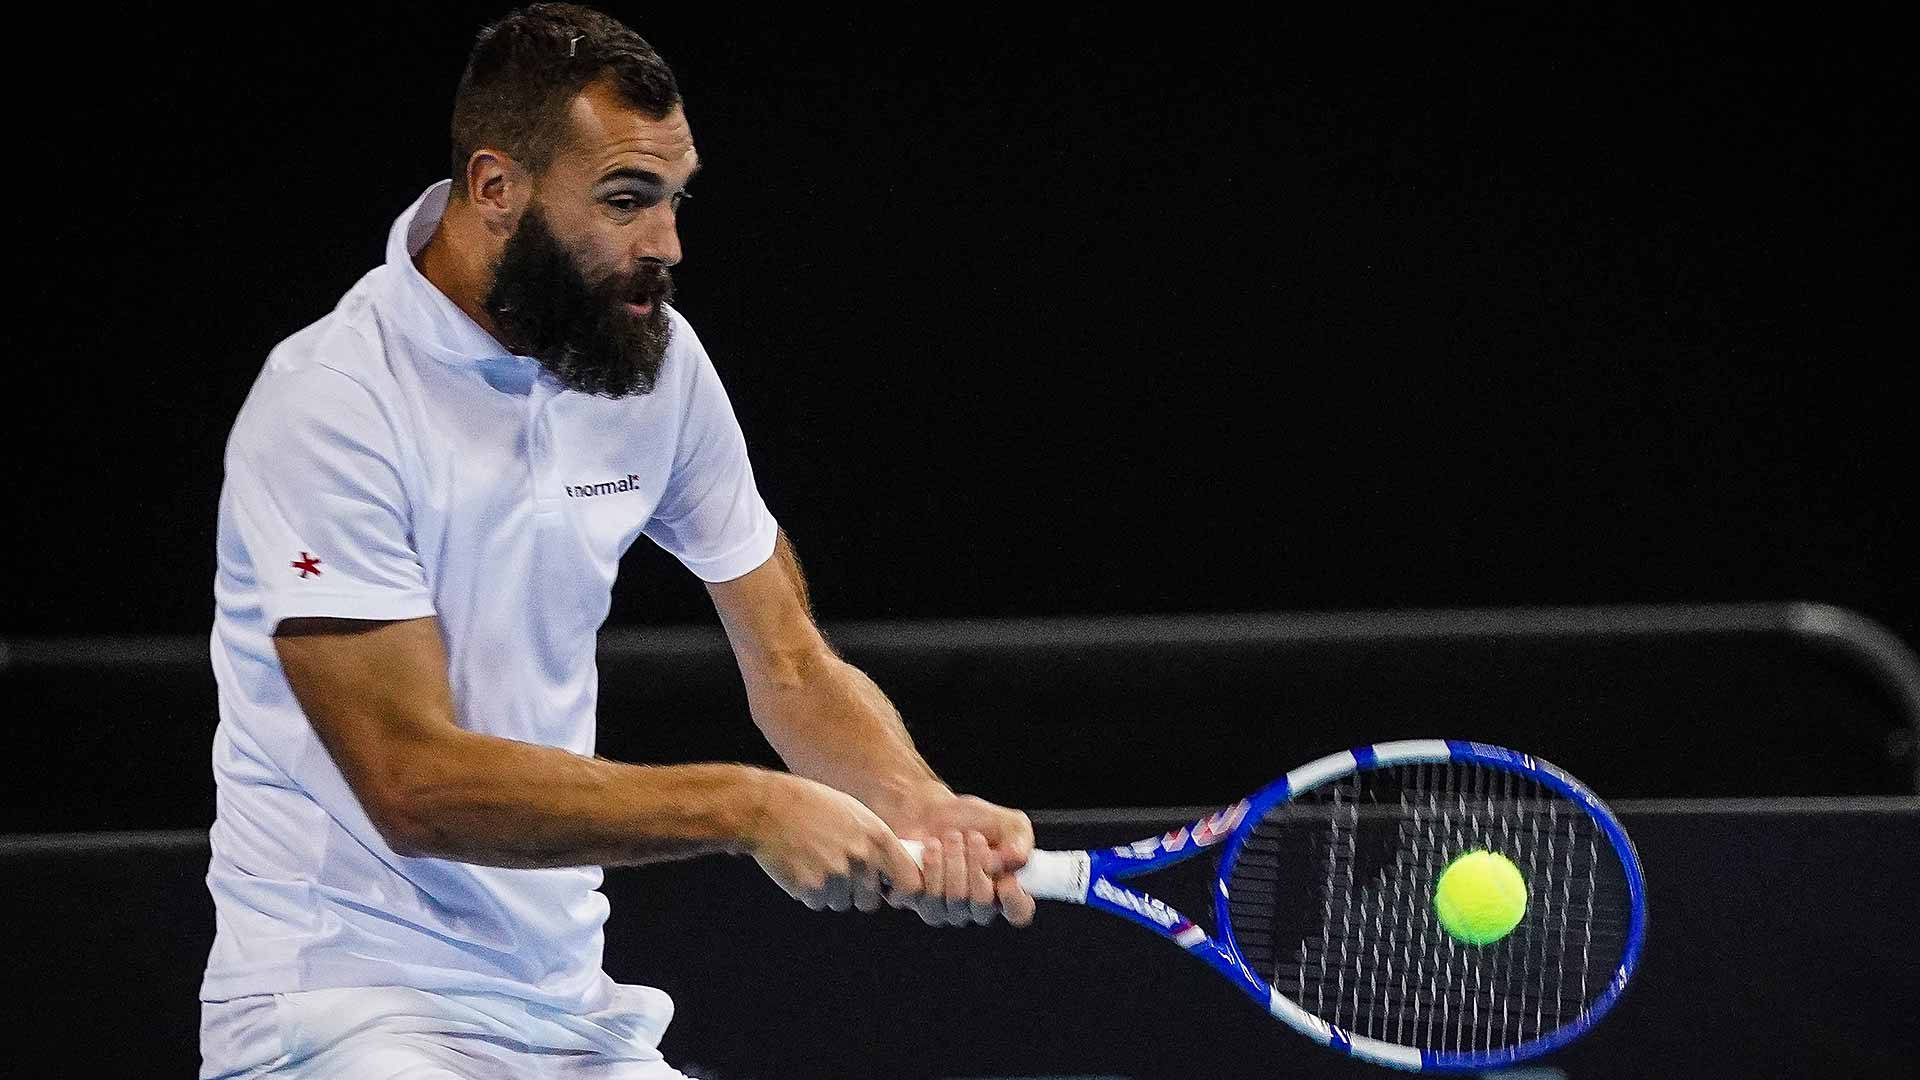 Intense Game Moment with Benoit Paire Wallpaper